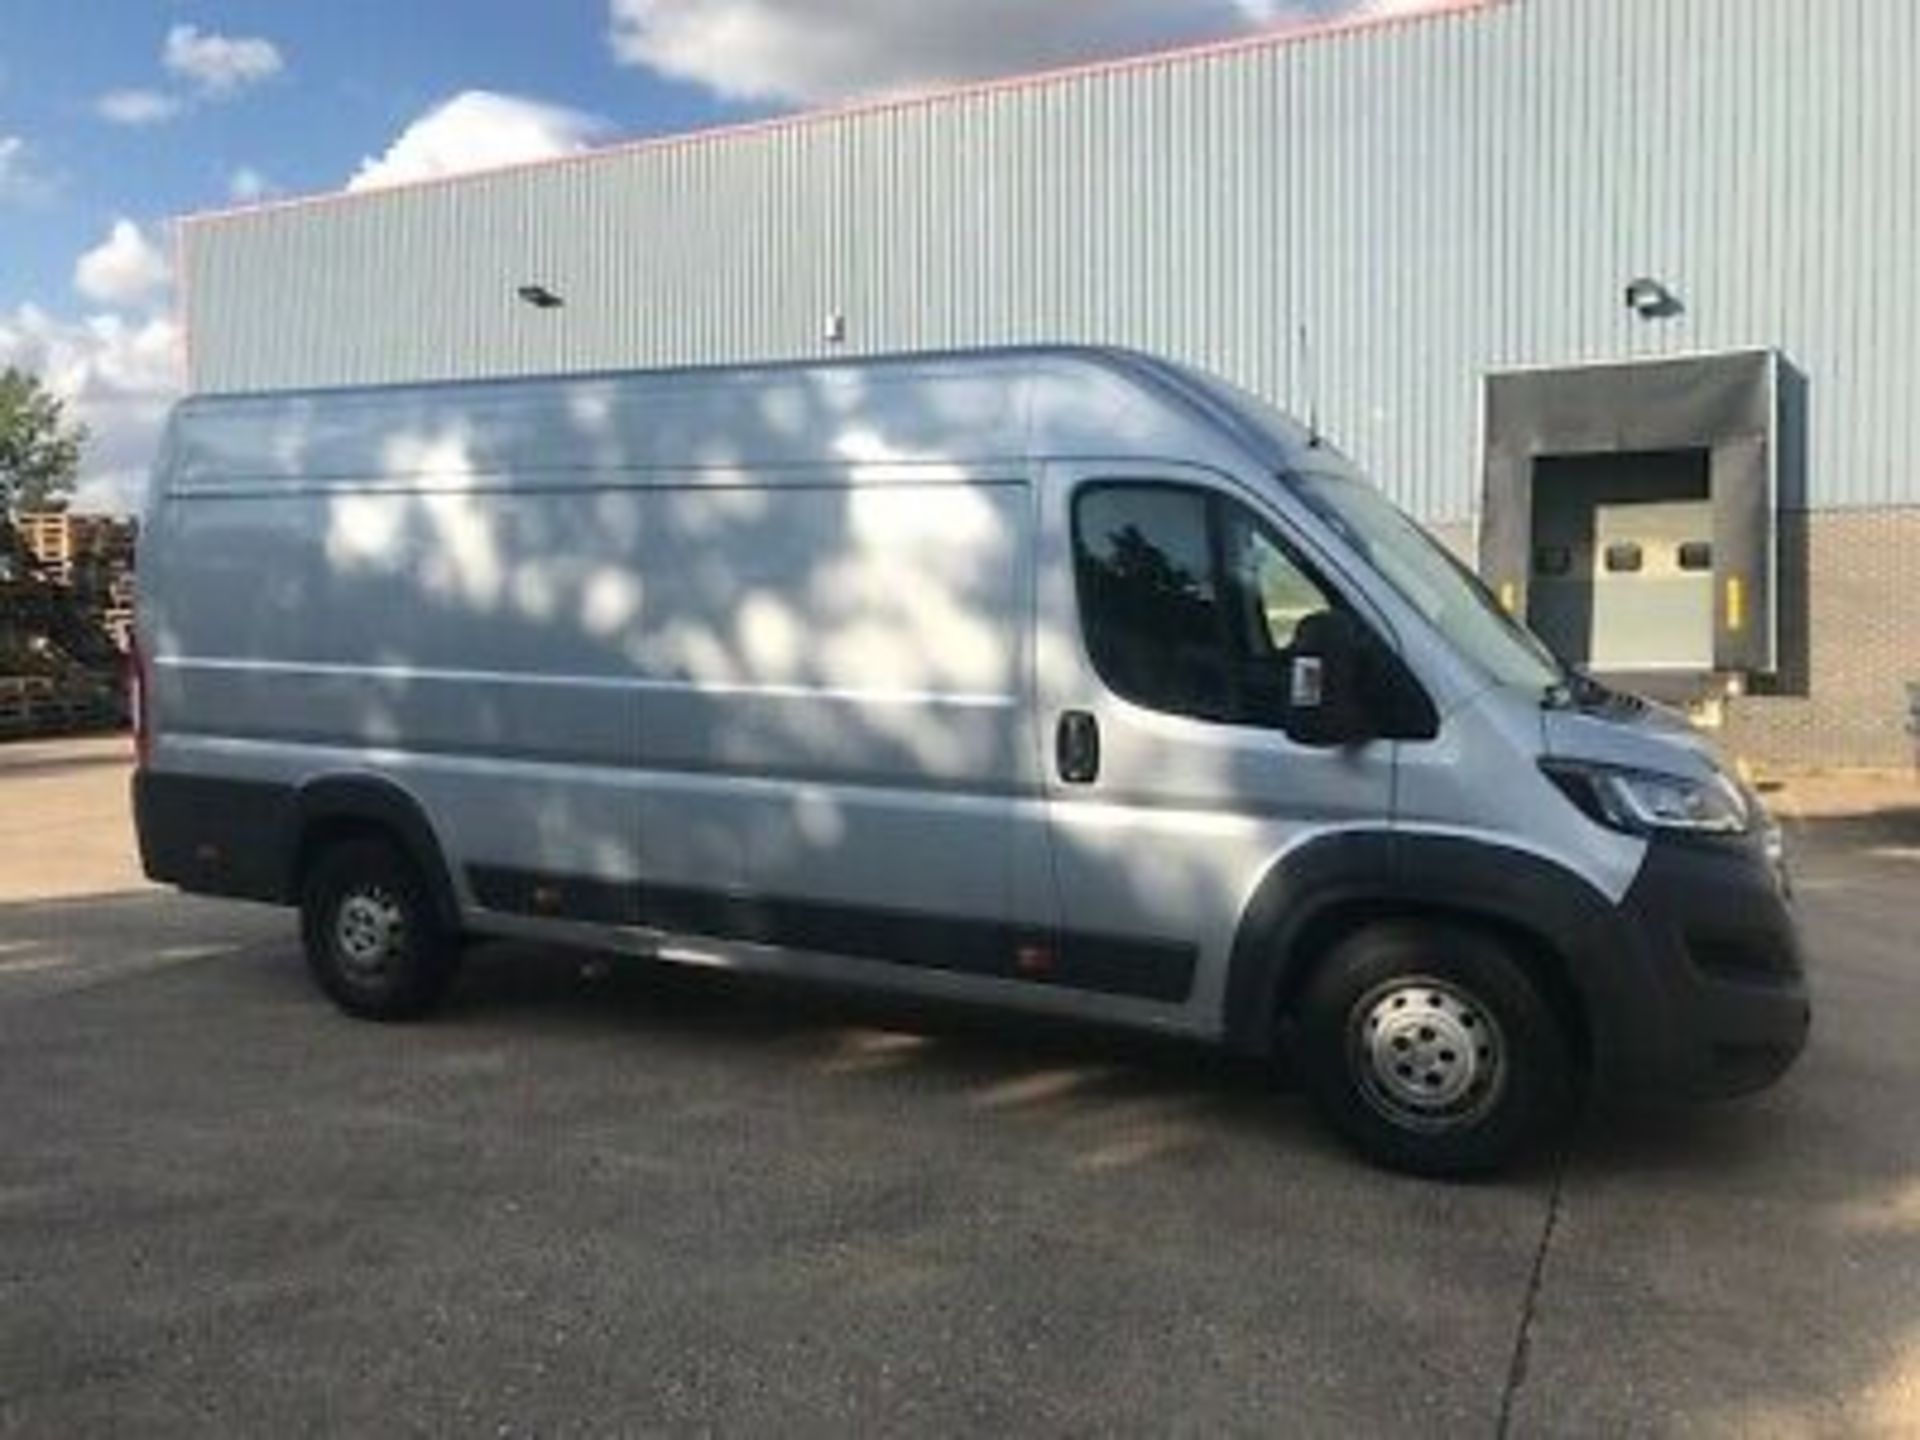 (On Sale) PEUGEOT BOXER 2.0 "BLUE HDI" 435 L4H2 EXTRA LONG WHEEL BASE (2017 EURO 6) 1 KEEPER